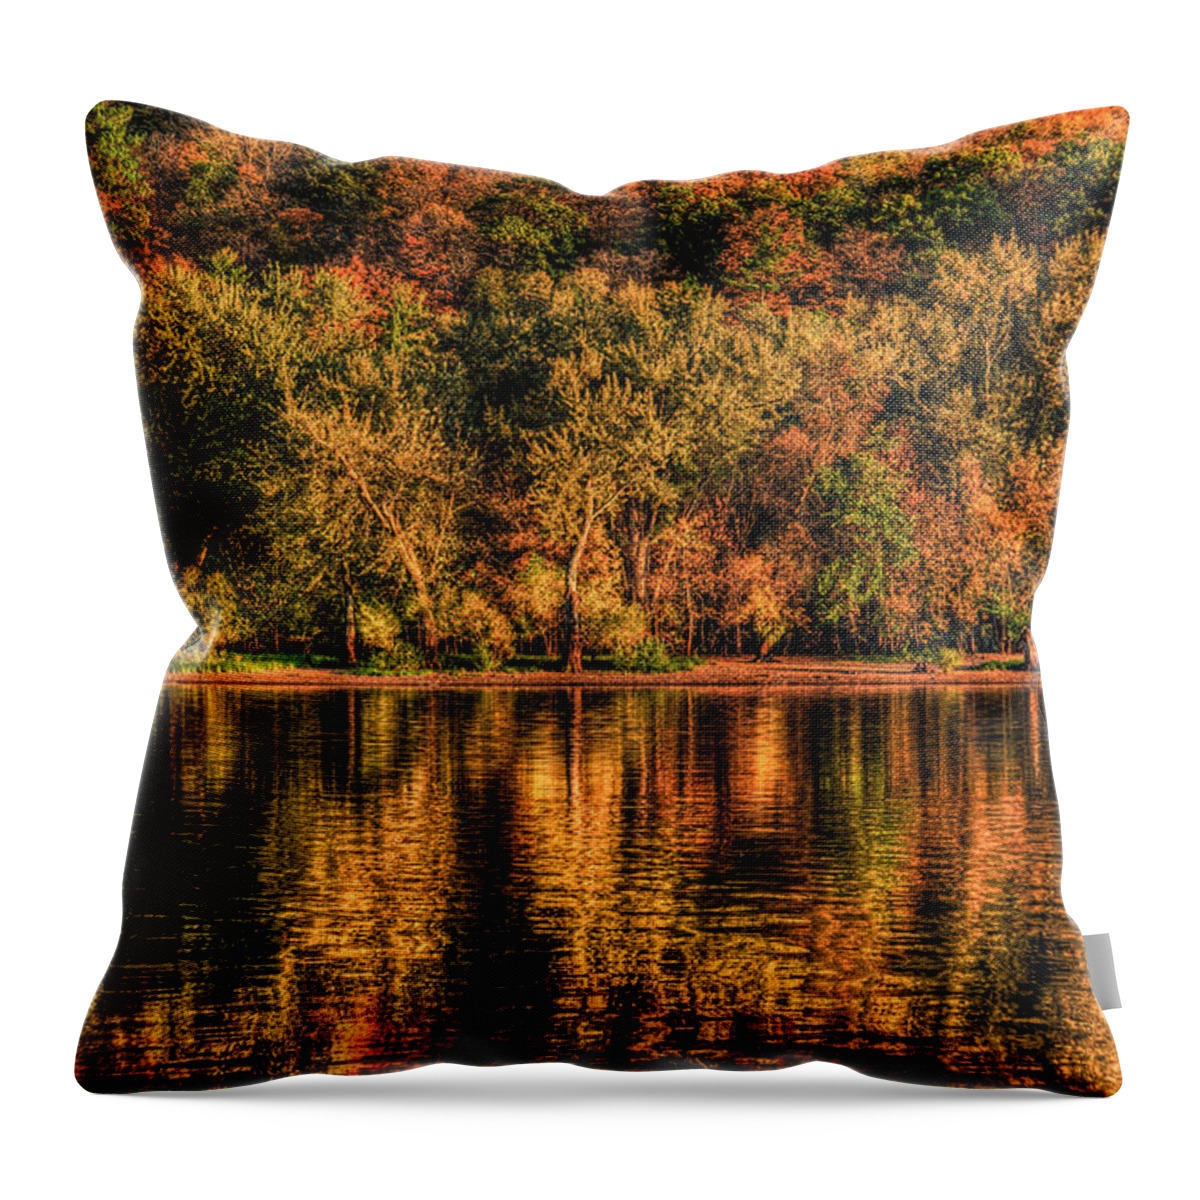 St. Croix River Throw Pillow featuring the photograph Fall Foliage by Adam Mateo Fierro